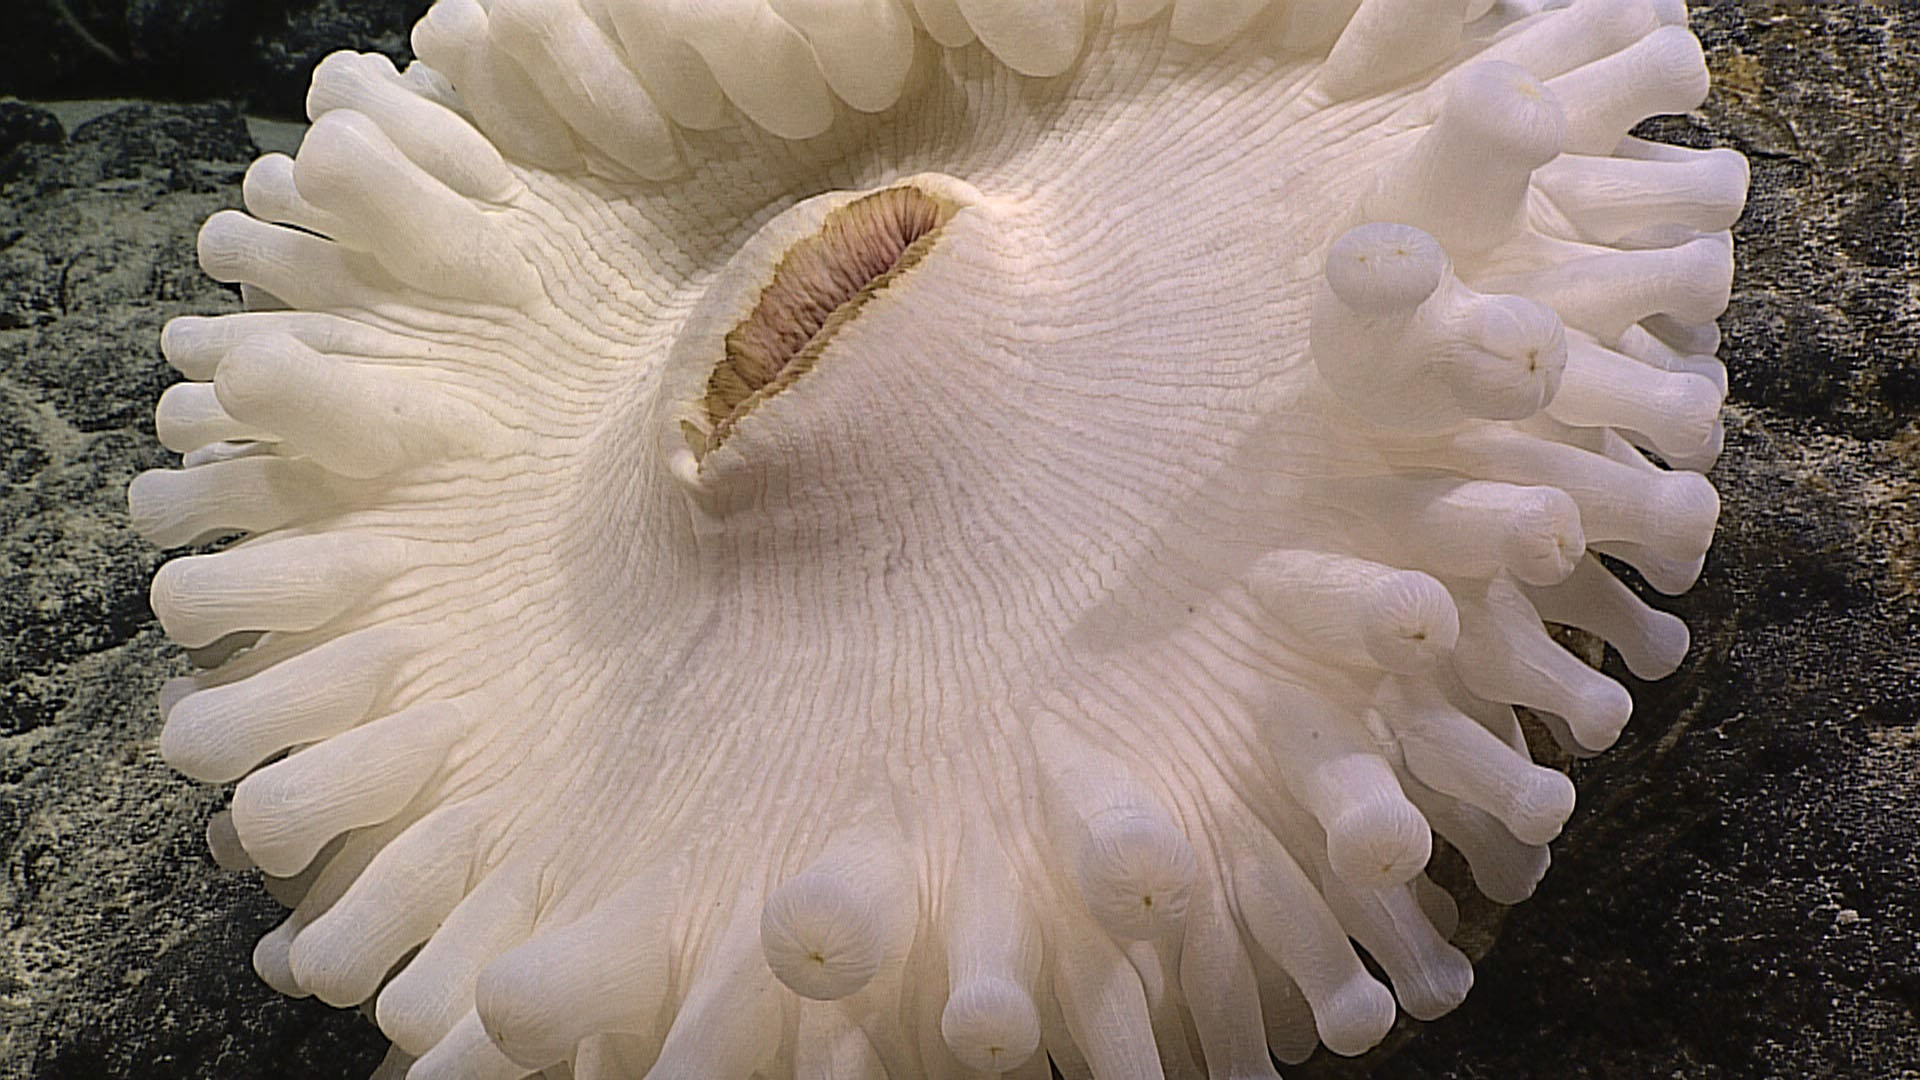 This giant anemone, which was seen the first remotely operated vehicle dive of the current Deepwater Wonders of Wake expedition, measured 20-30 centimeters (8-12 inches) across and featured tentacles unlike any the science party had seen before.